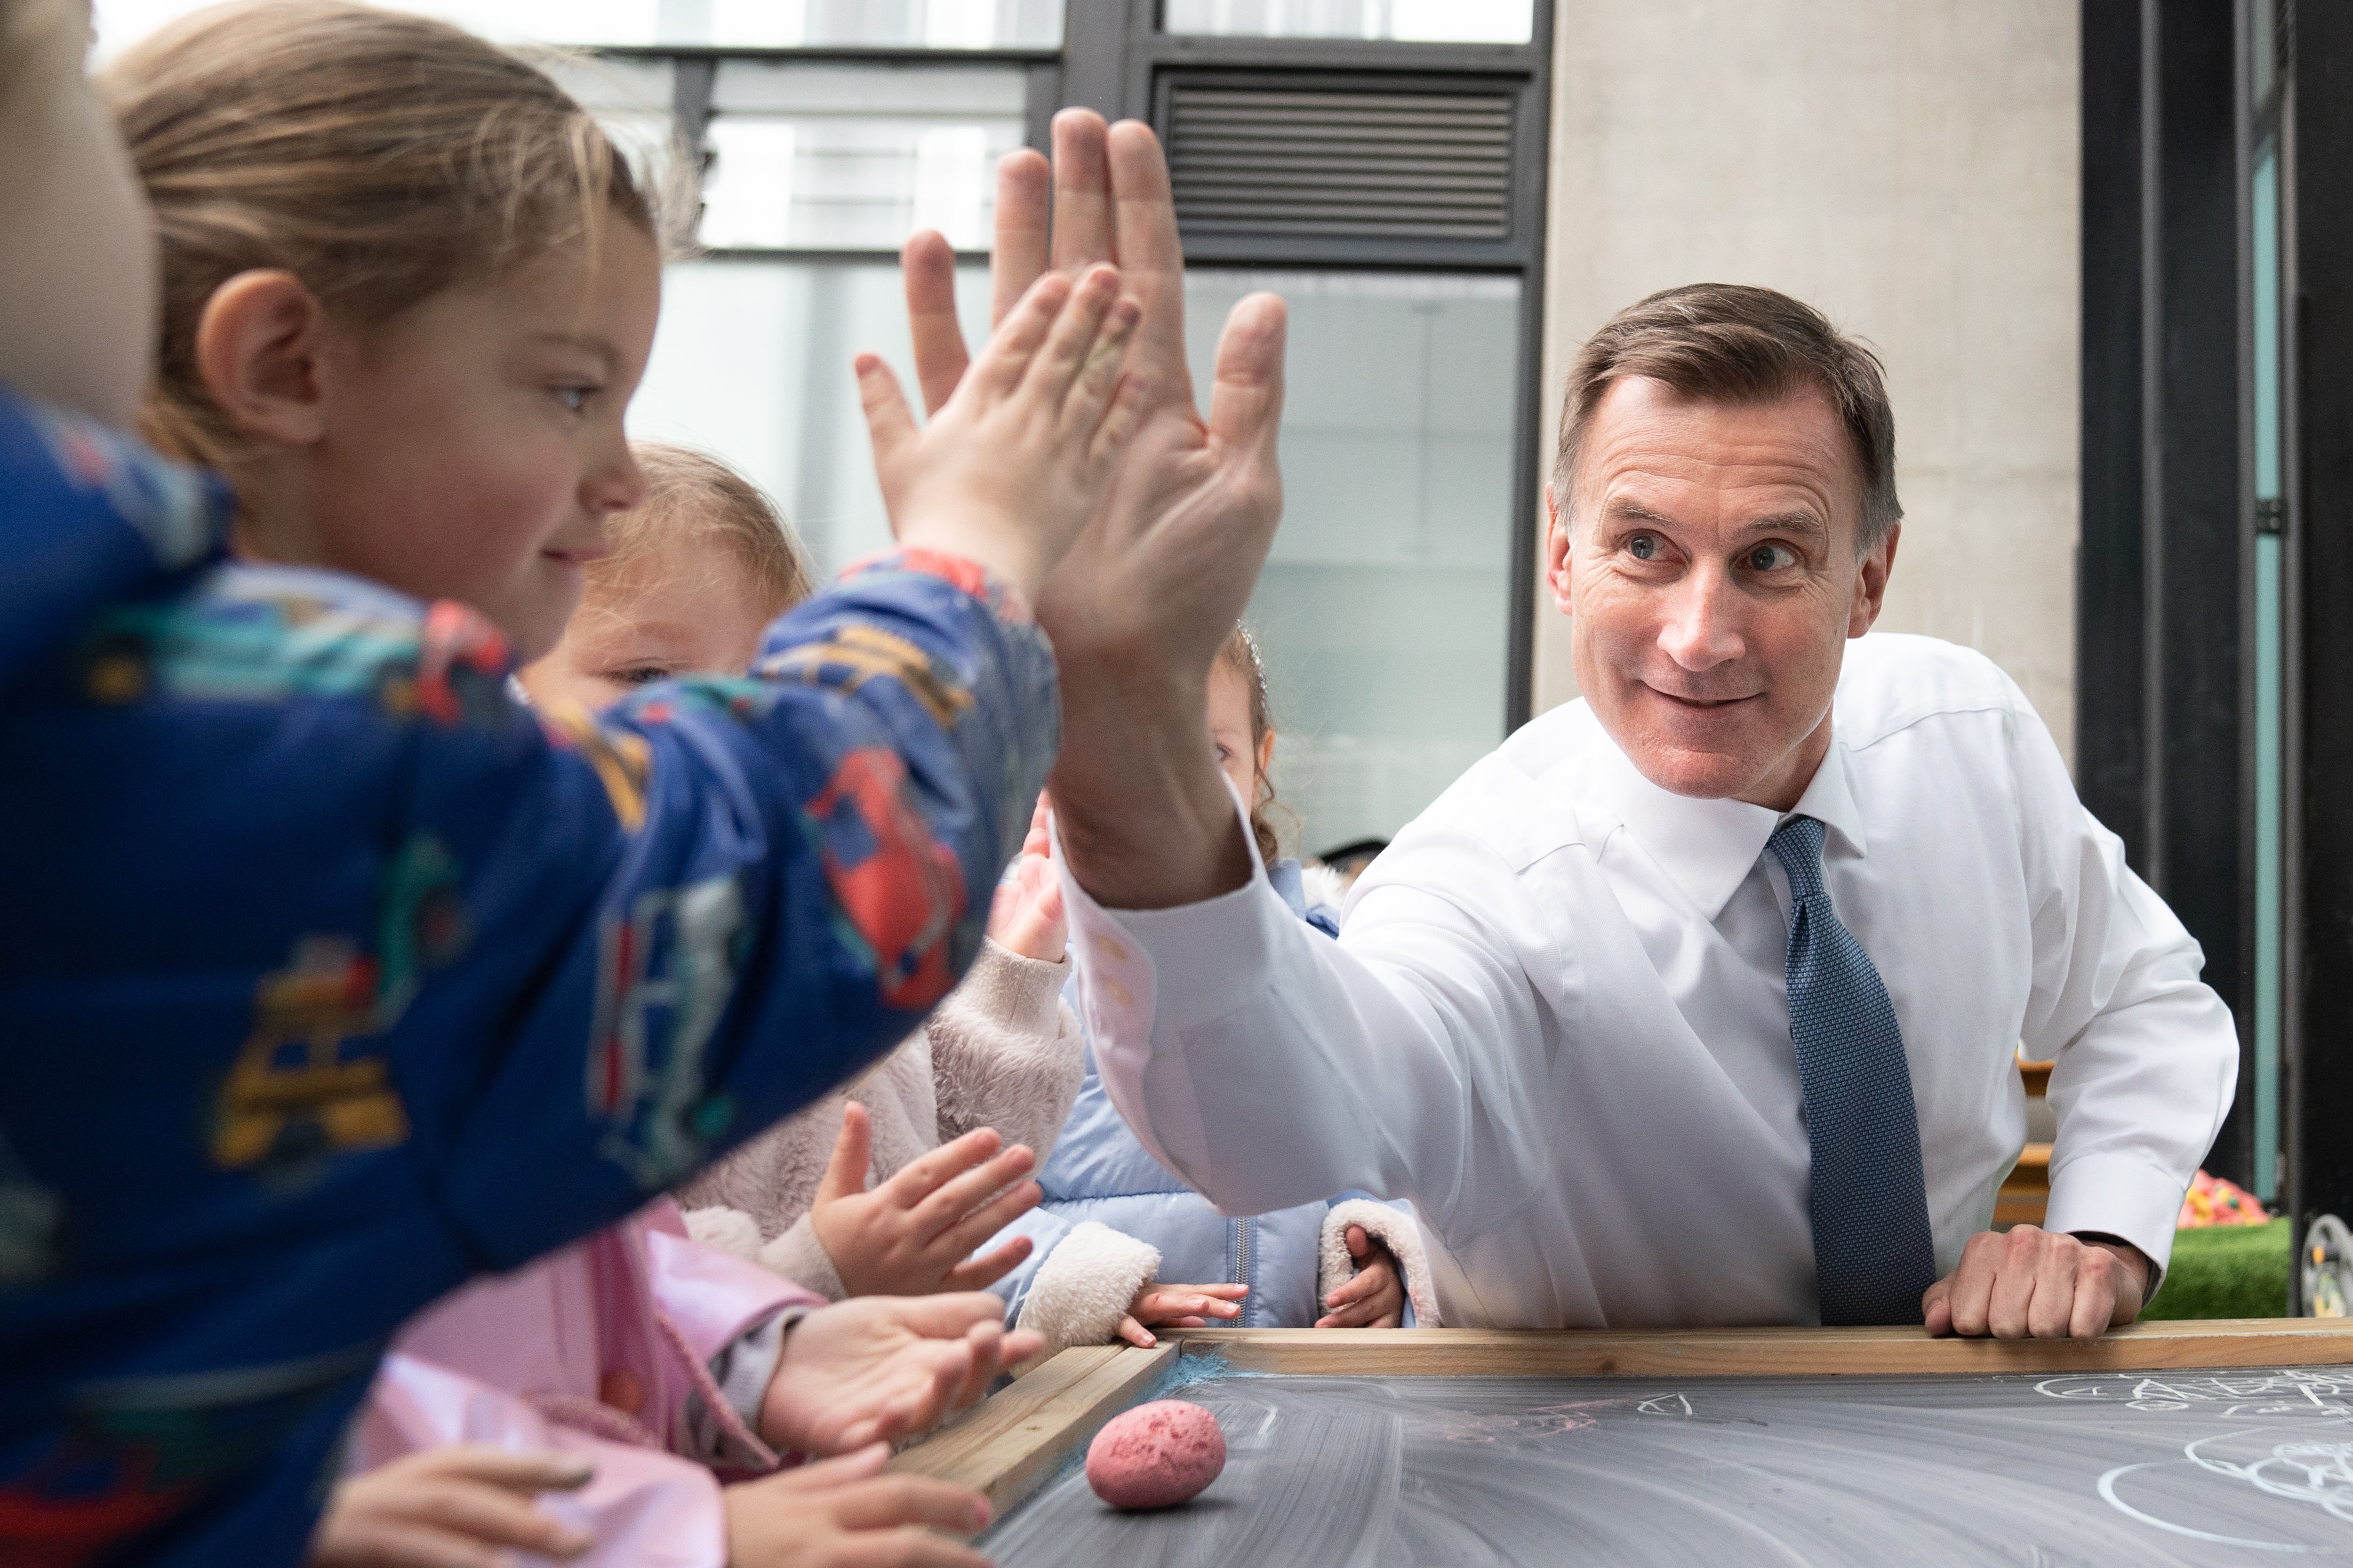 Chancellor Jeremy Hunt last year announced that eligible families of children as young as nine months old in England would be able to claim 30 hours of free childcare a week by September 2025